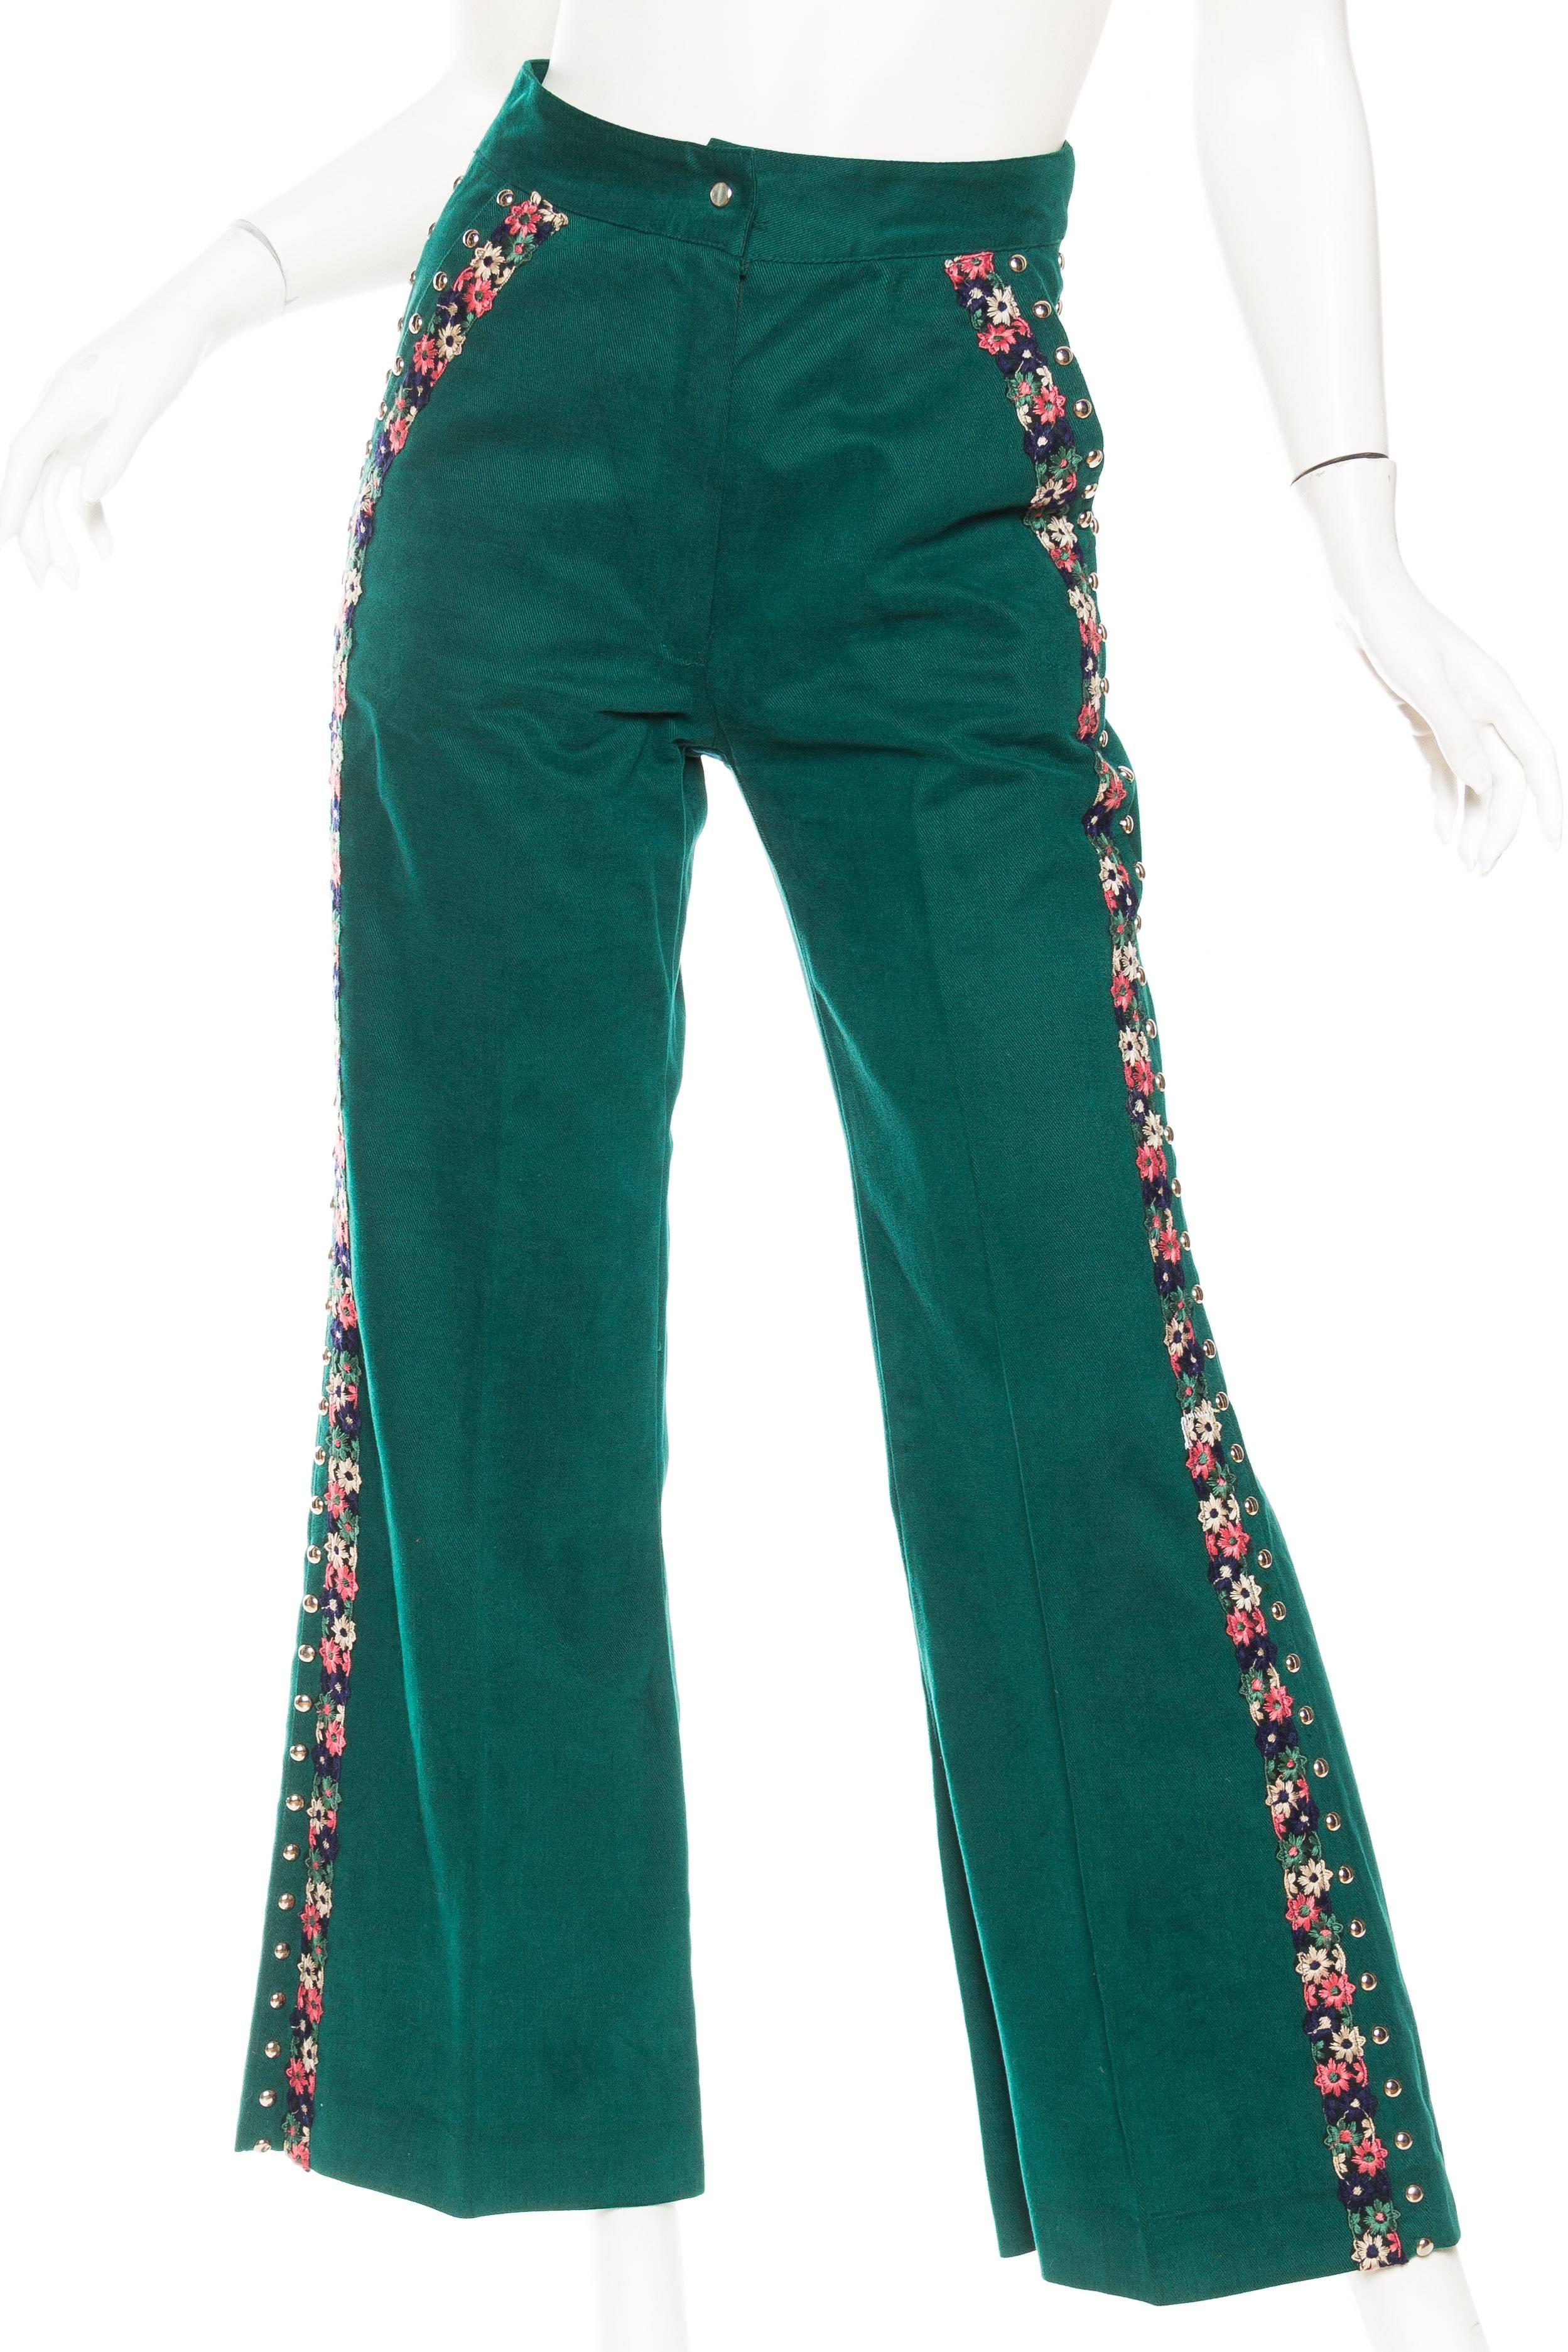 Gucci Style 1970s Studded Denim Suit with Floral Embroidery 4